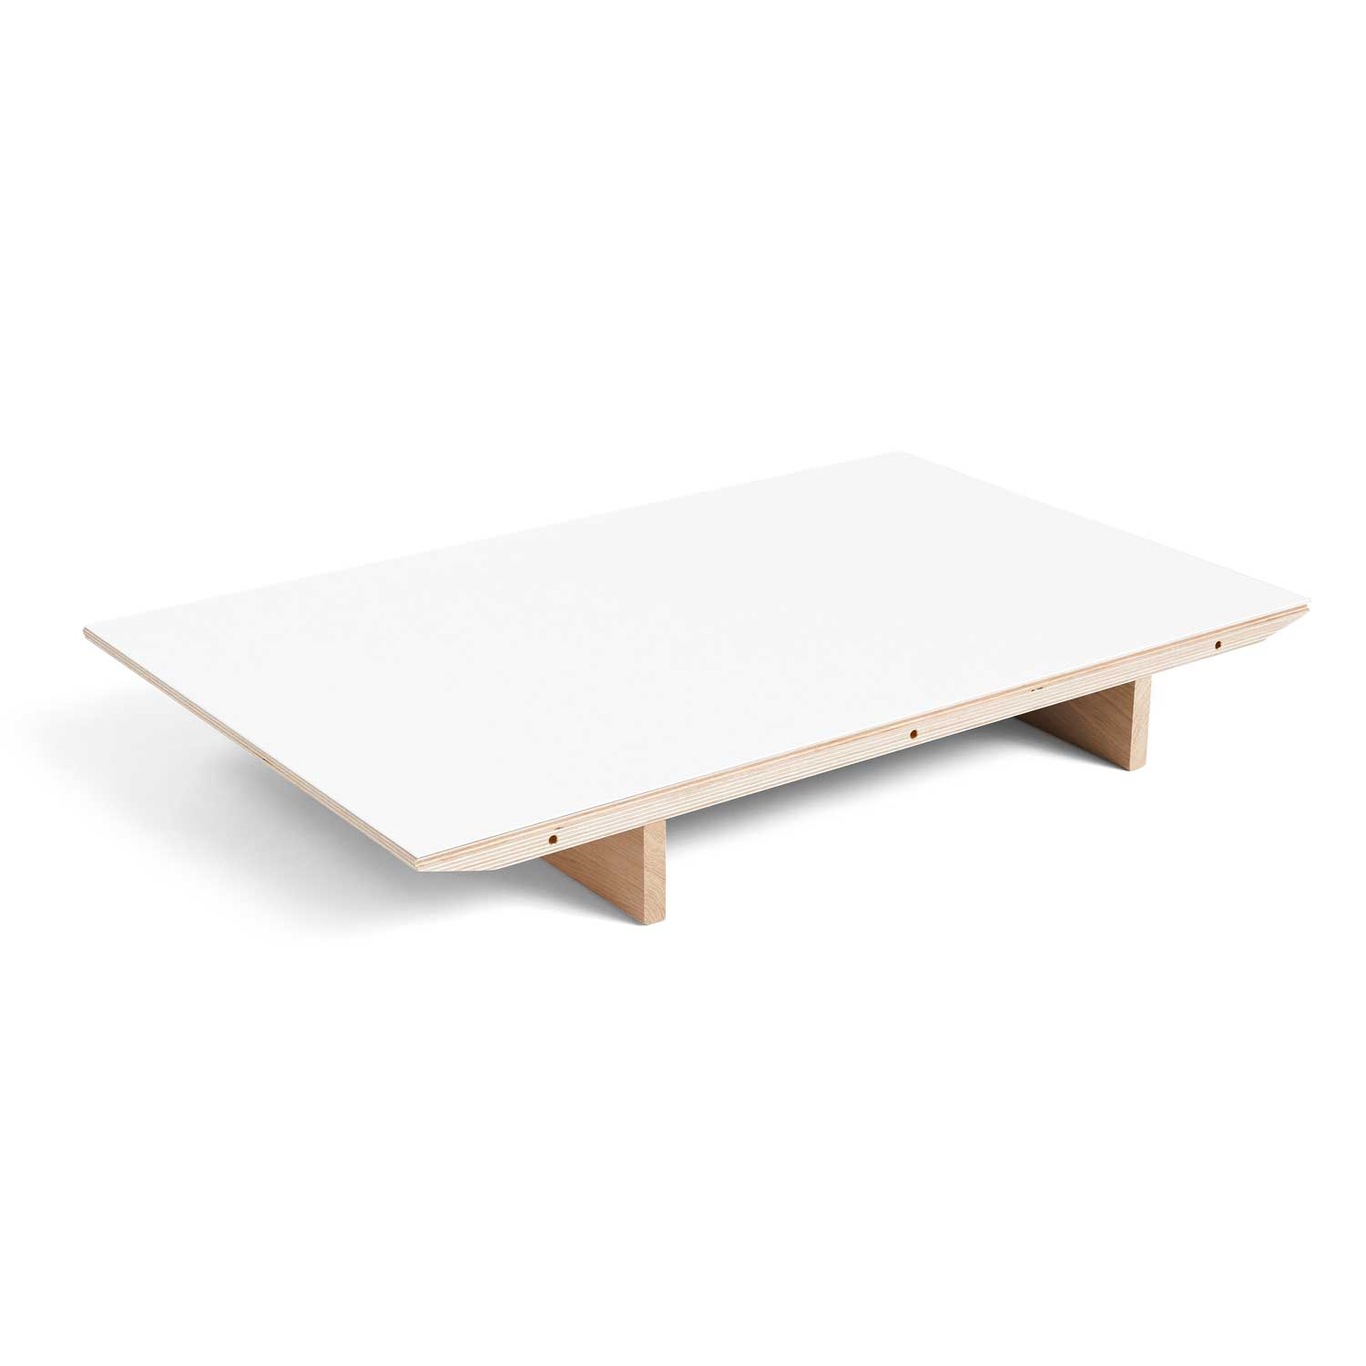 CPH 30 Extendable Leaf 50x80 cm, White Laminate/Water-based Lacquered Oak